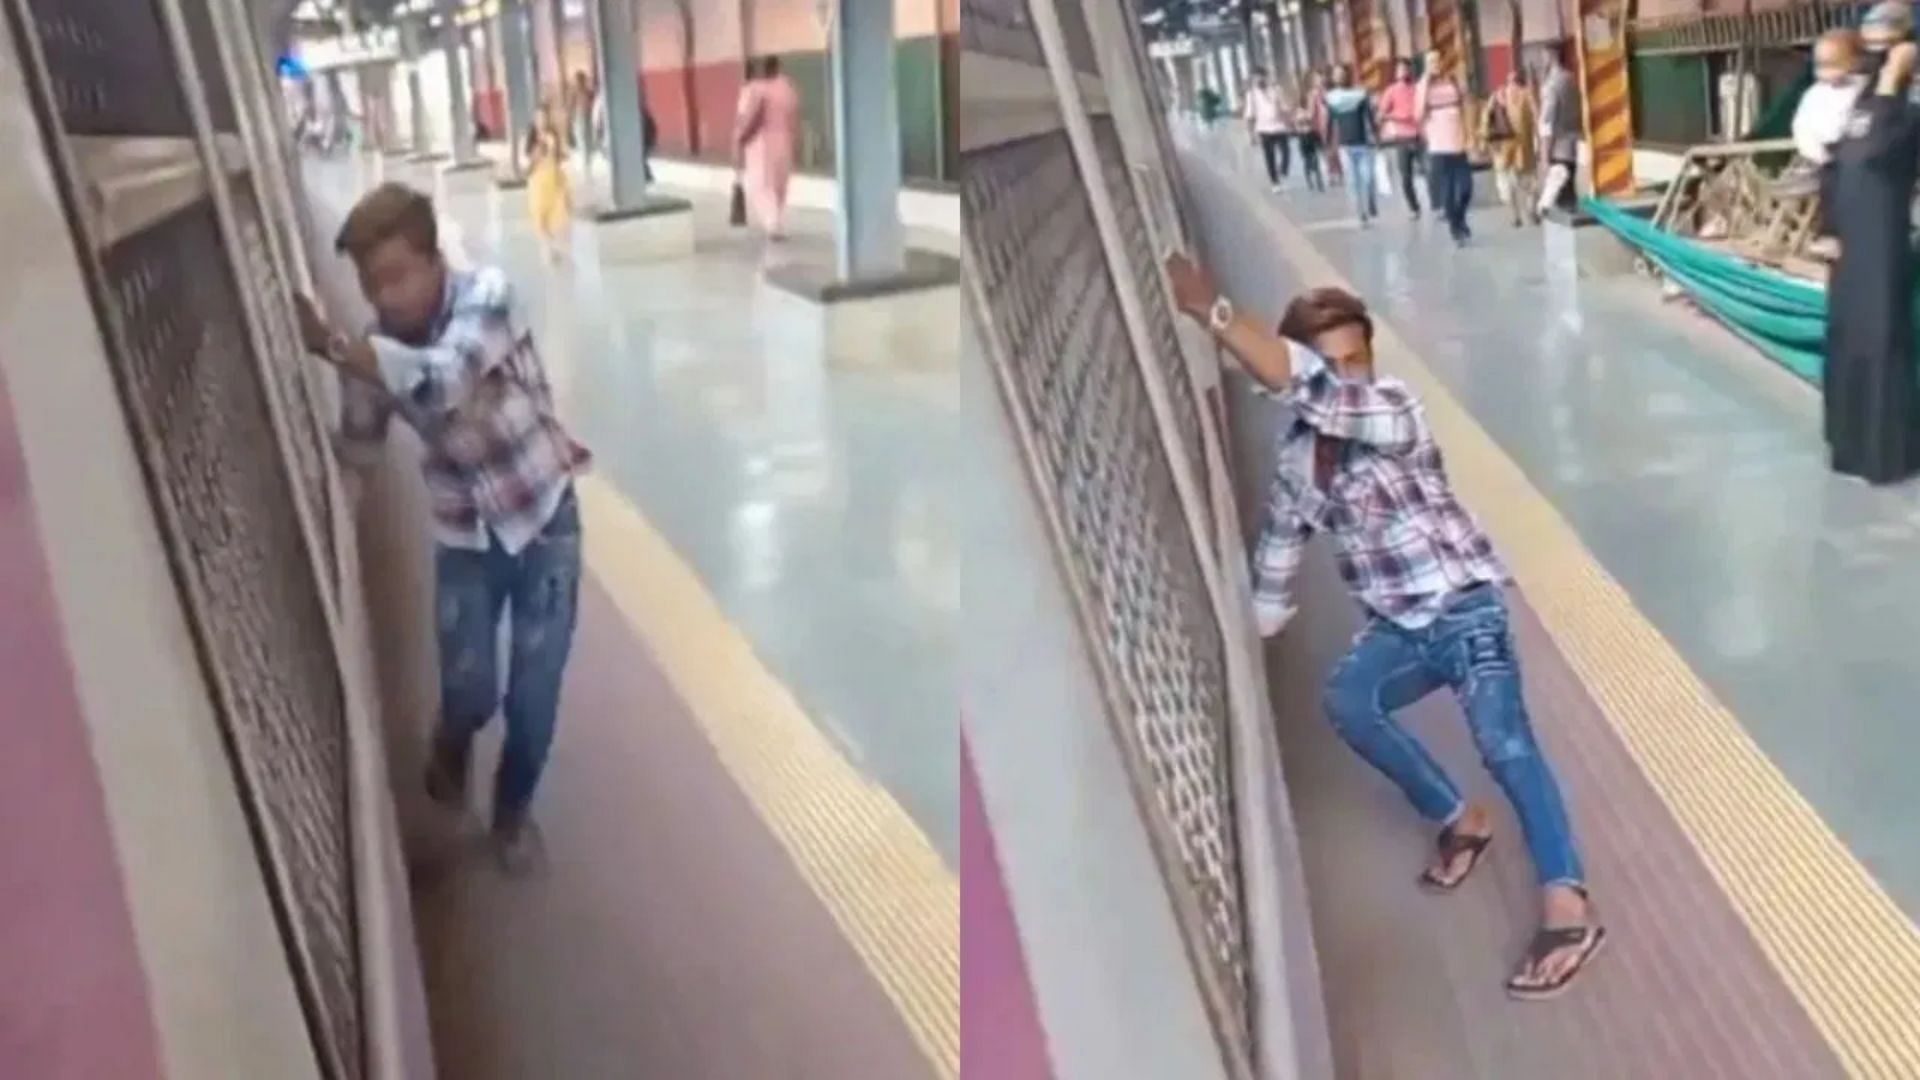 Man perform shocking stunt on railway station video is going viral on social media